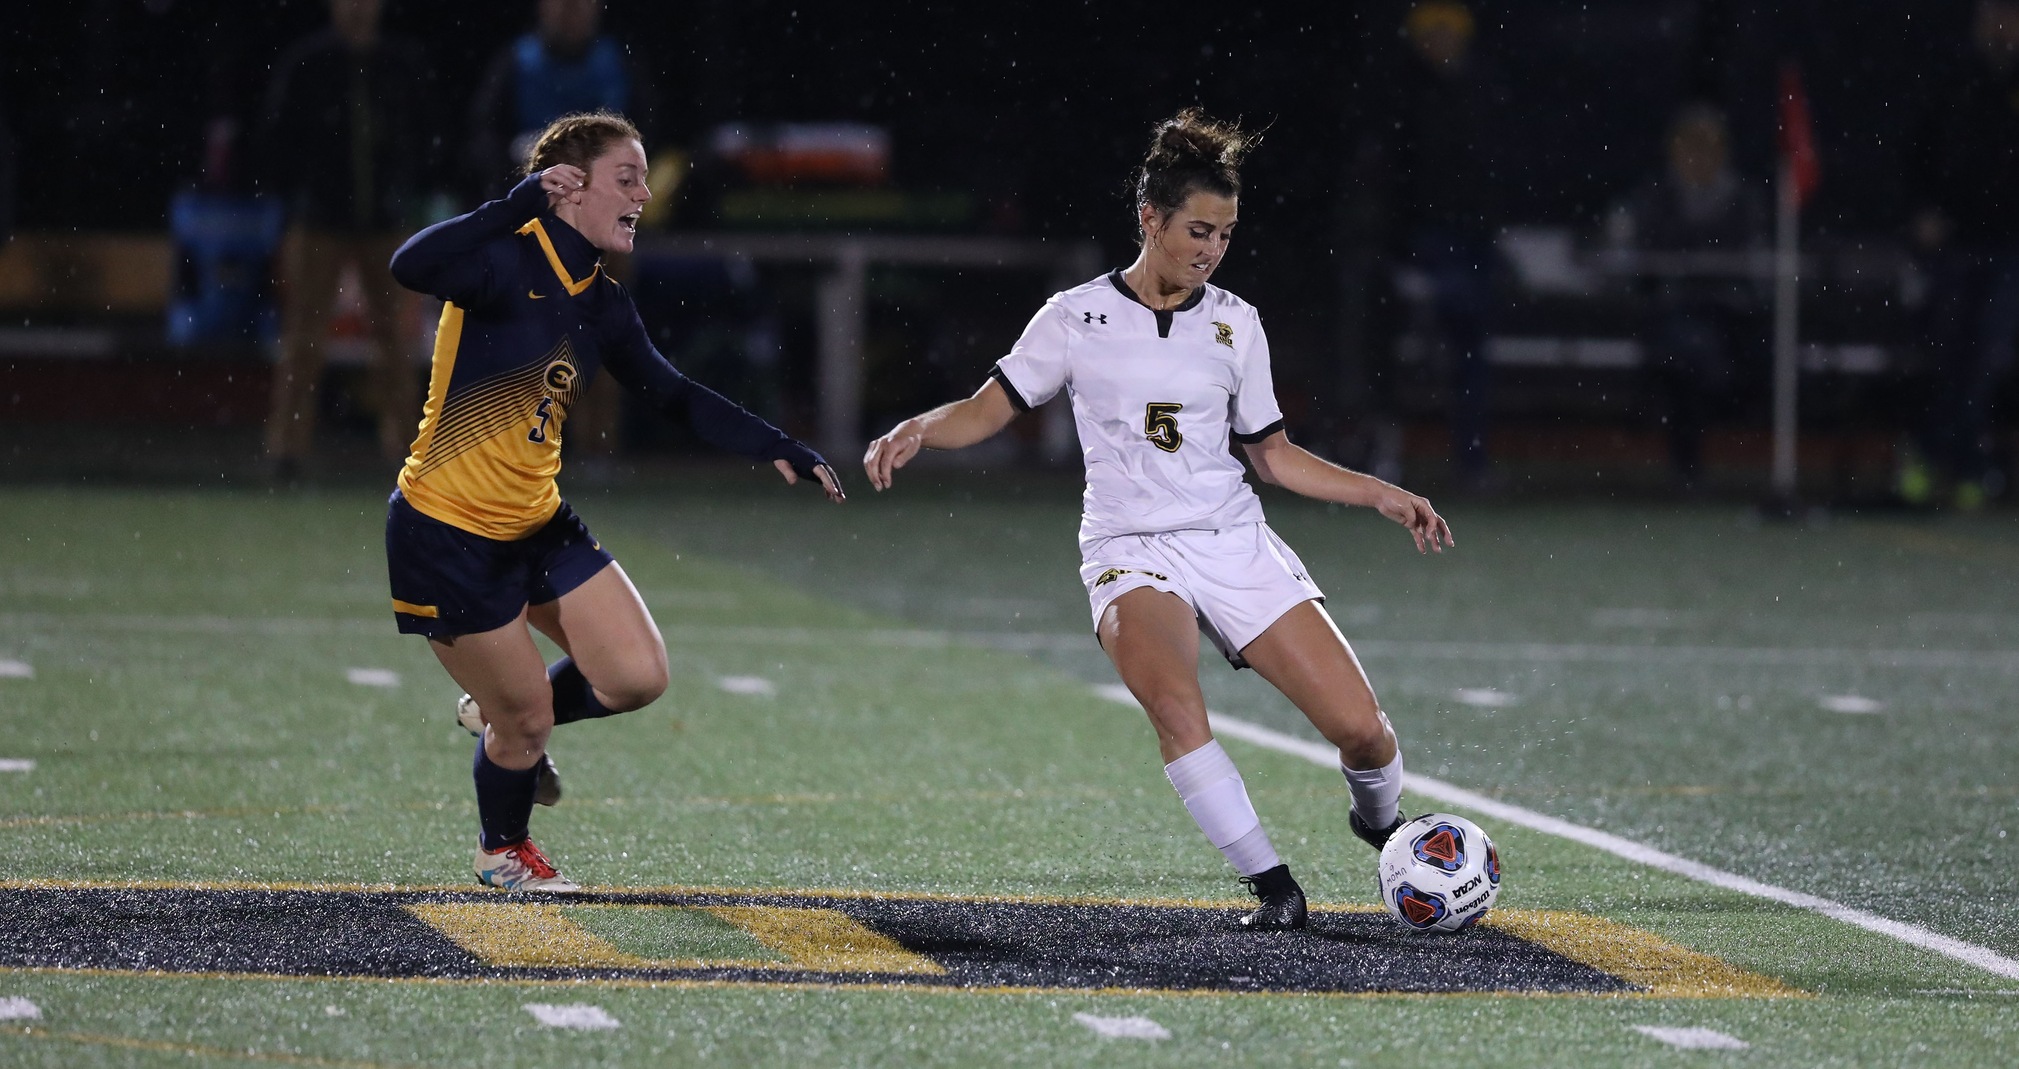 Addie Schmitz scored the Titans' match-winning goal against the Blugolds in the second overtime session.